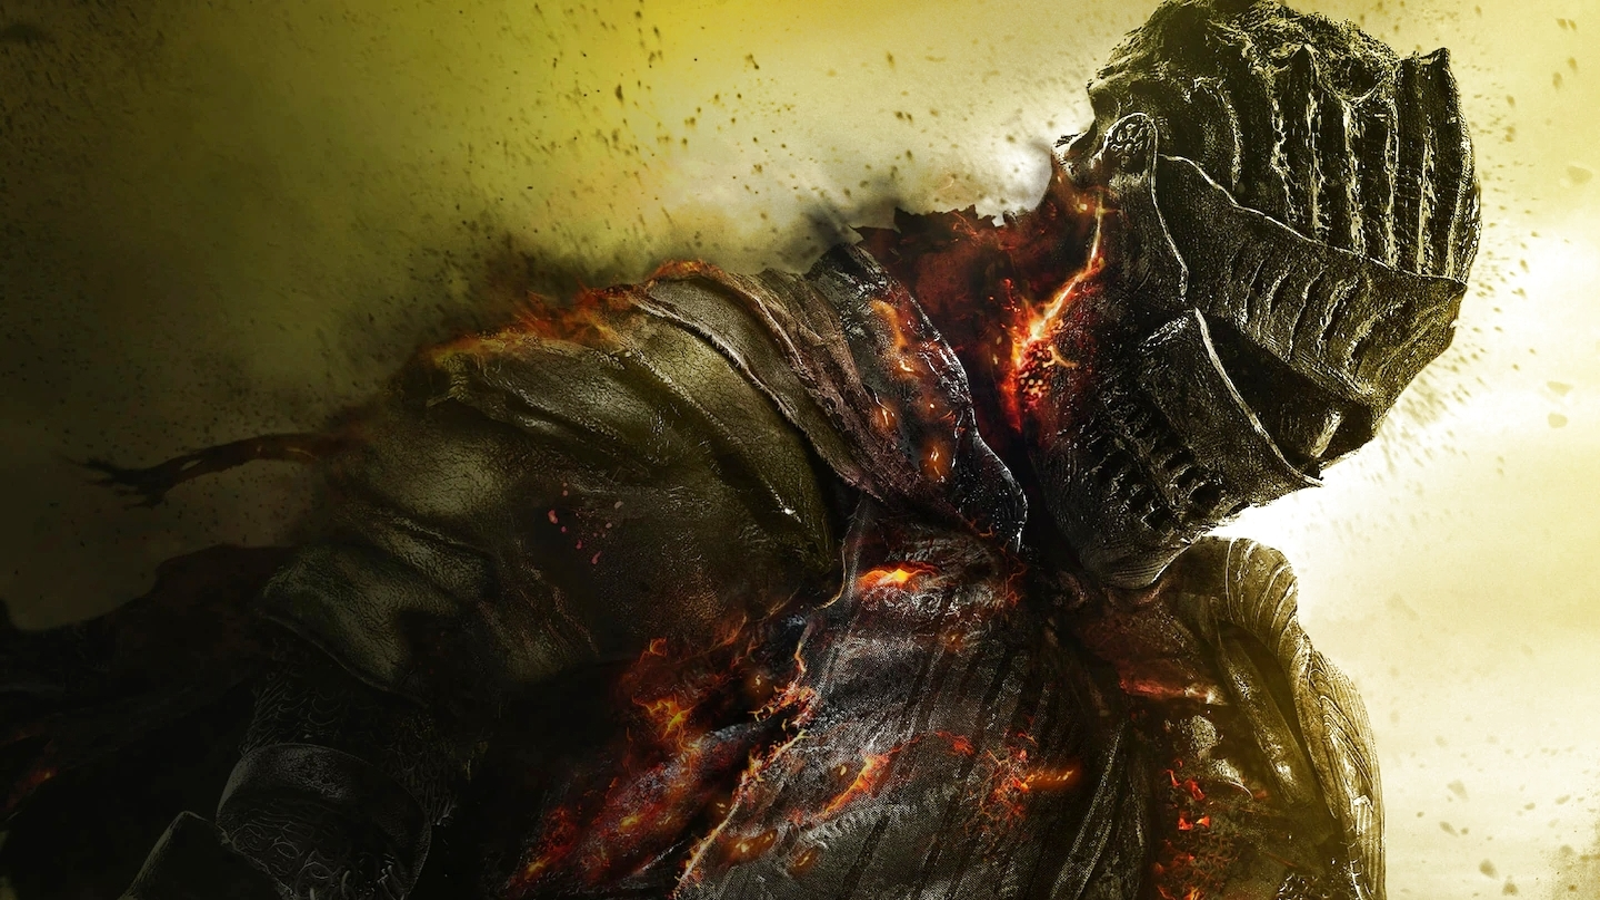 Dark Souls 3 now runs at 60fps on Xbox Series X/S thanks to FPS